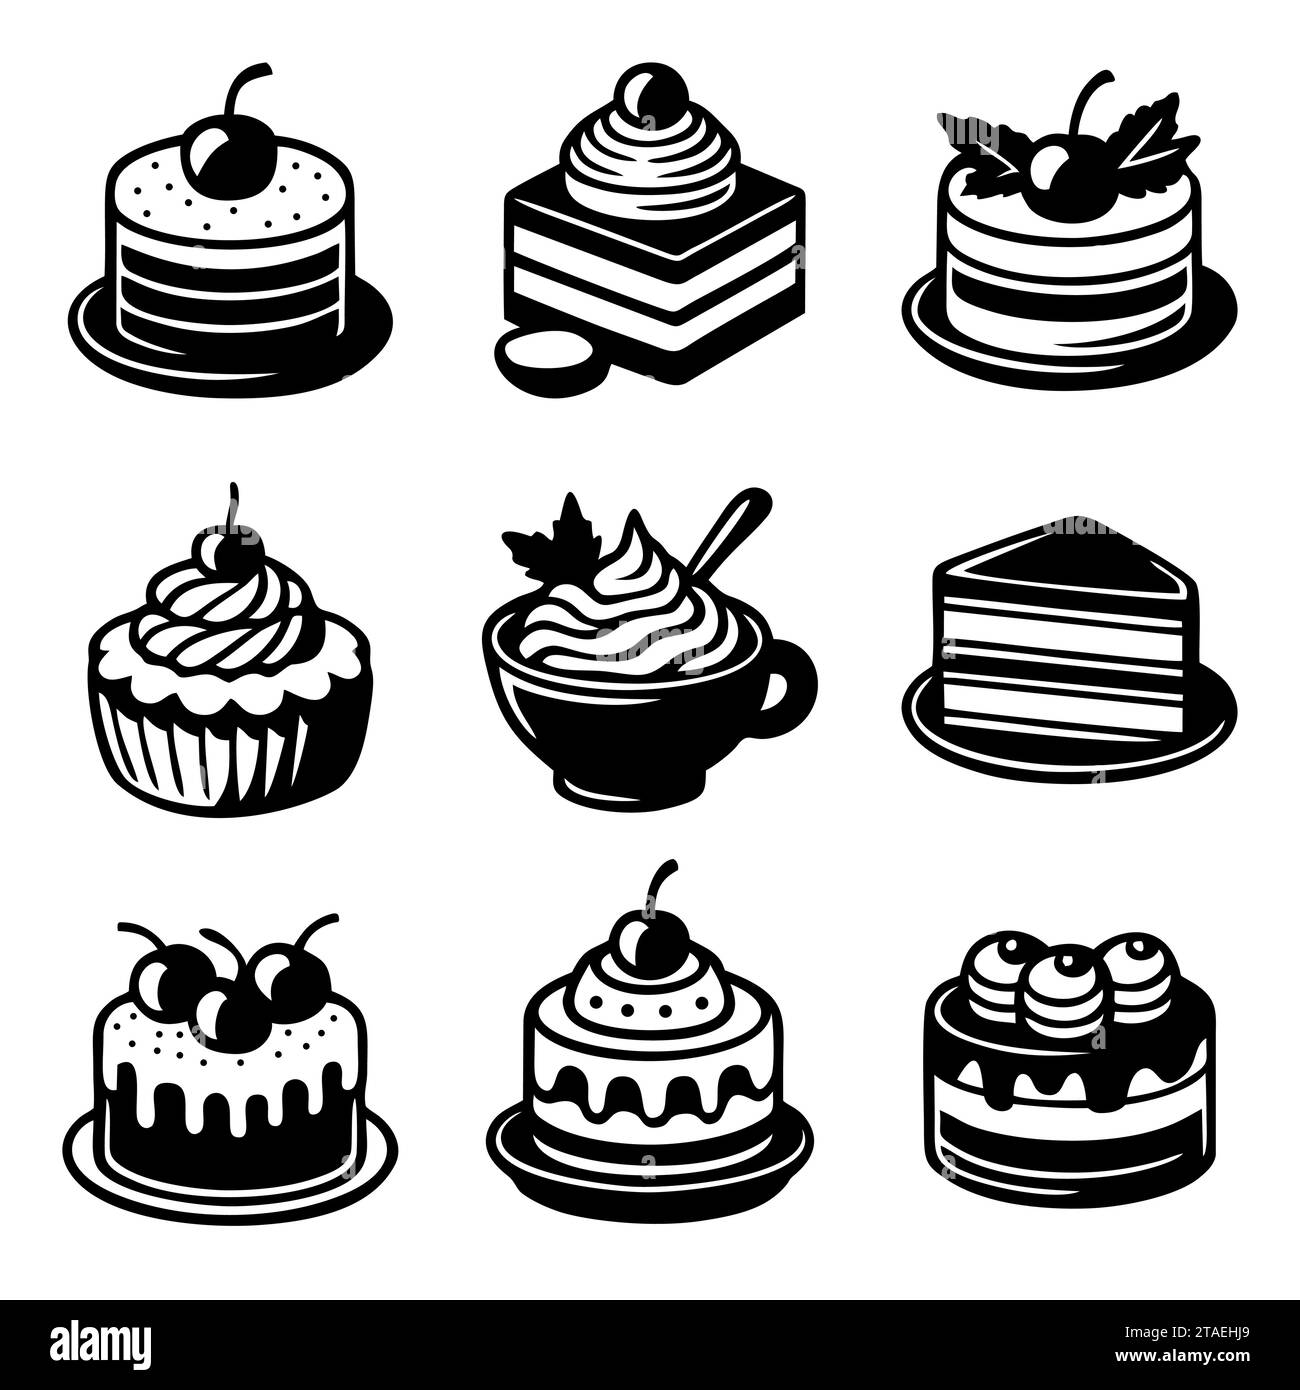 Cake dessert black icons set. Sign kit of sweet food. Simple delicious black symbol. Sweet birthday cakes, Bakery cupcake isolated on white. Stock Vector